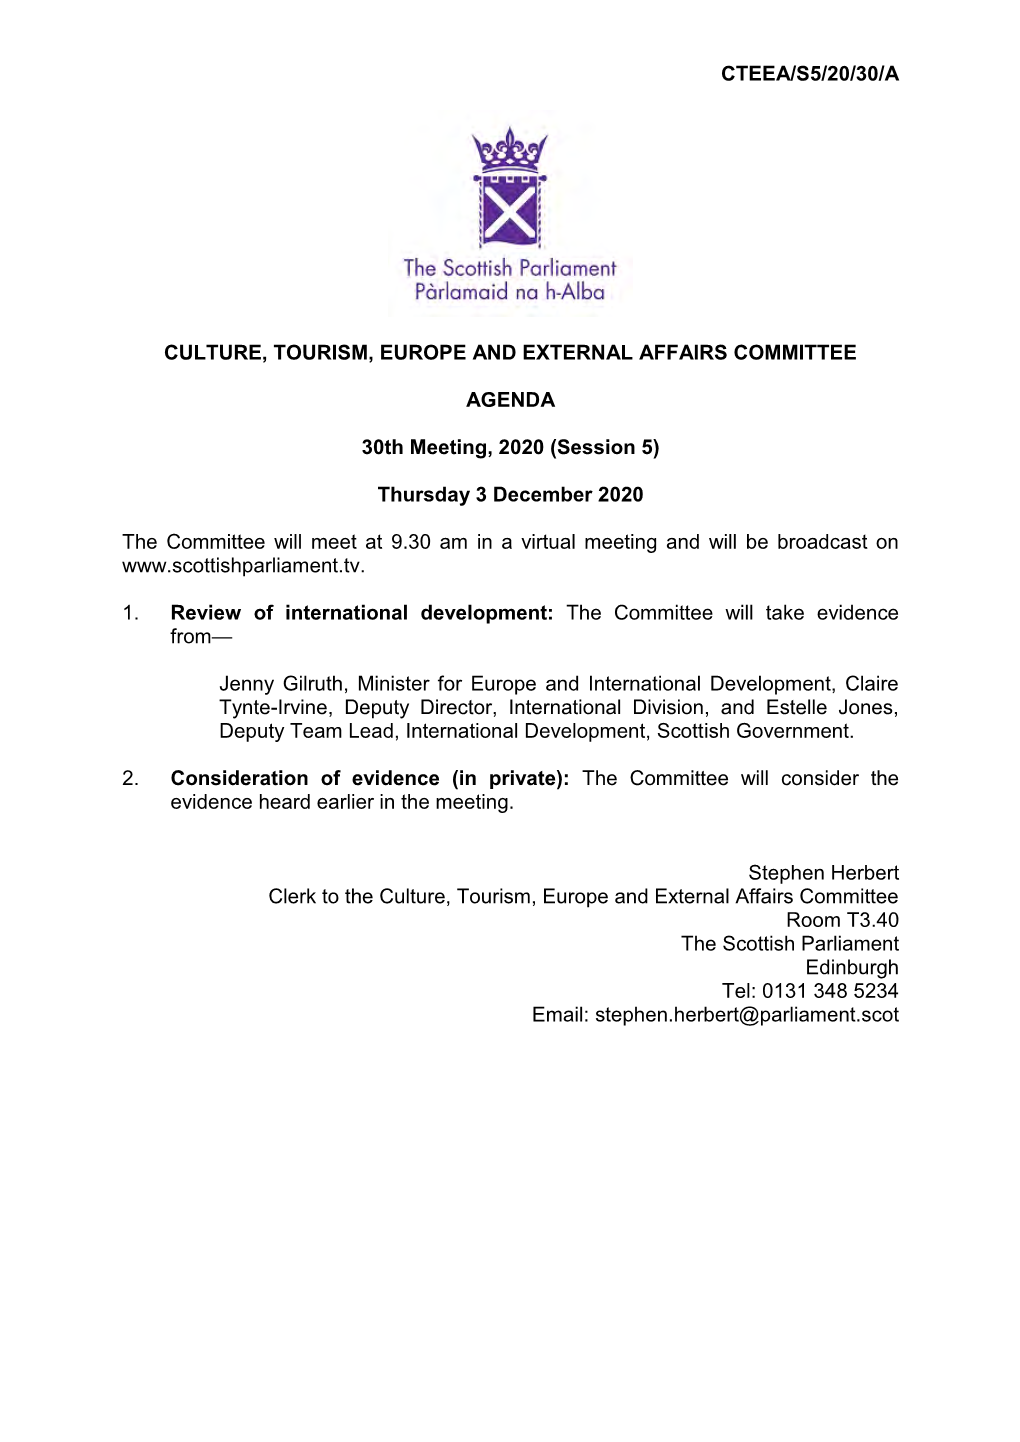 CTEEA/S5/20/30/A CULTURE, TOURISM, EUROPE and EXTERNAL AFFAIRS COMMITTEE AGENDA 30Th Meeting, 2020 (Session 5) Thursday 3 Decemb